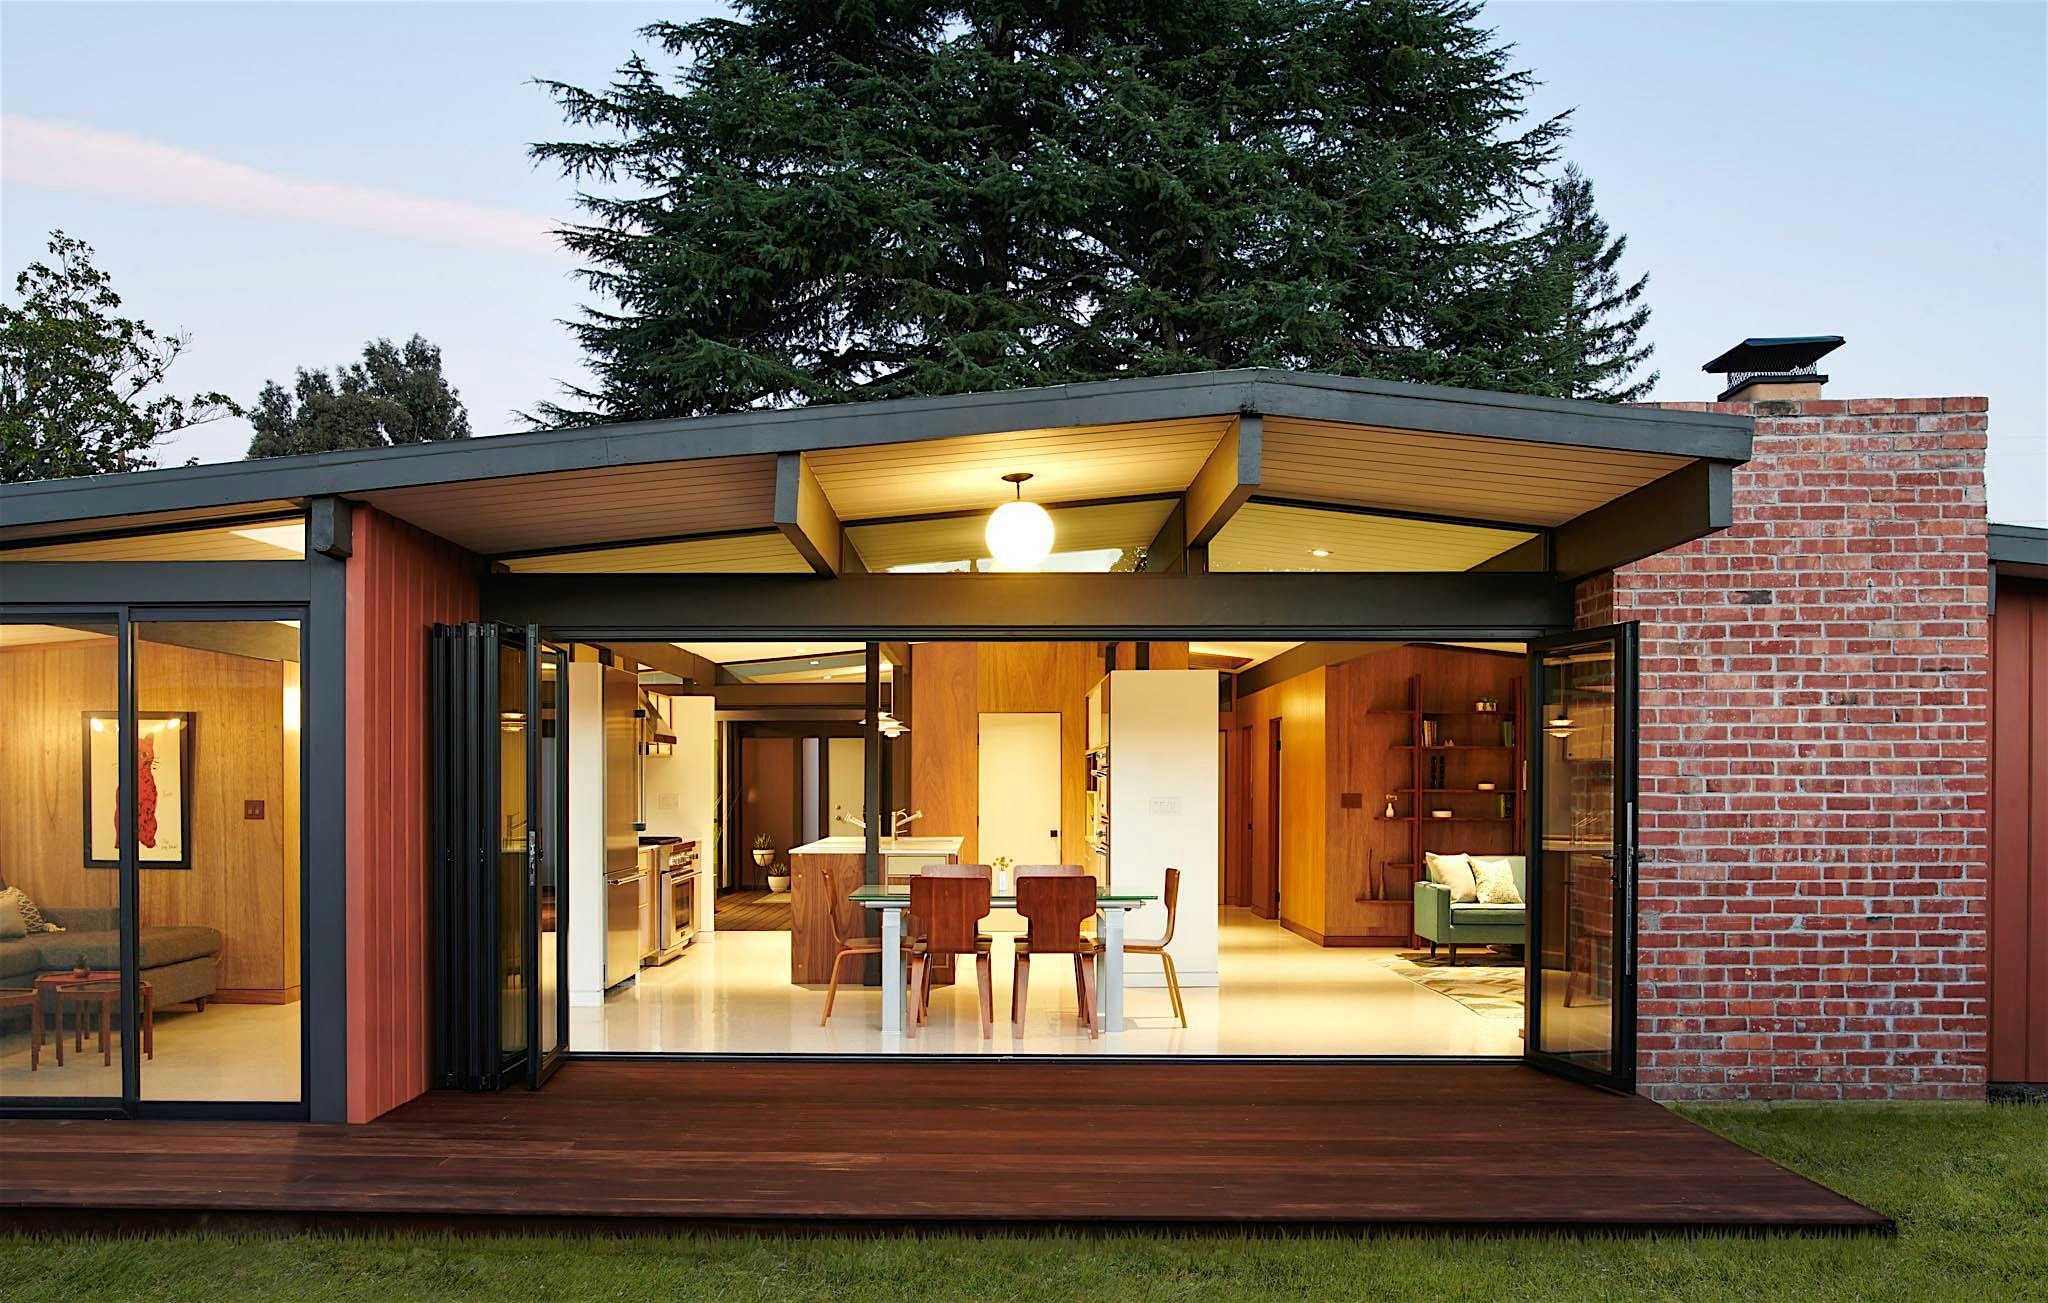 Eichler homes remodel with folding glass wall to let the outdoors in